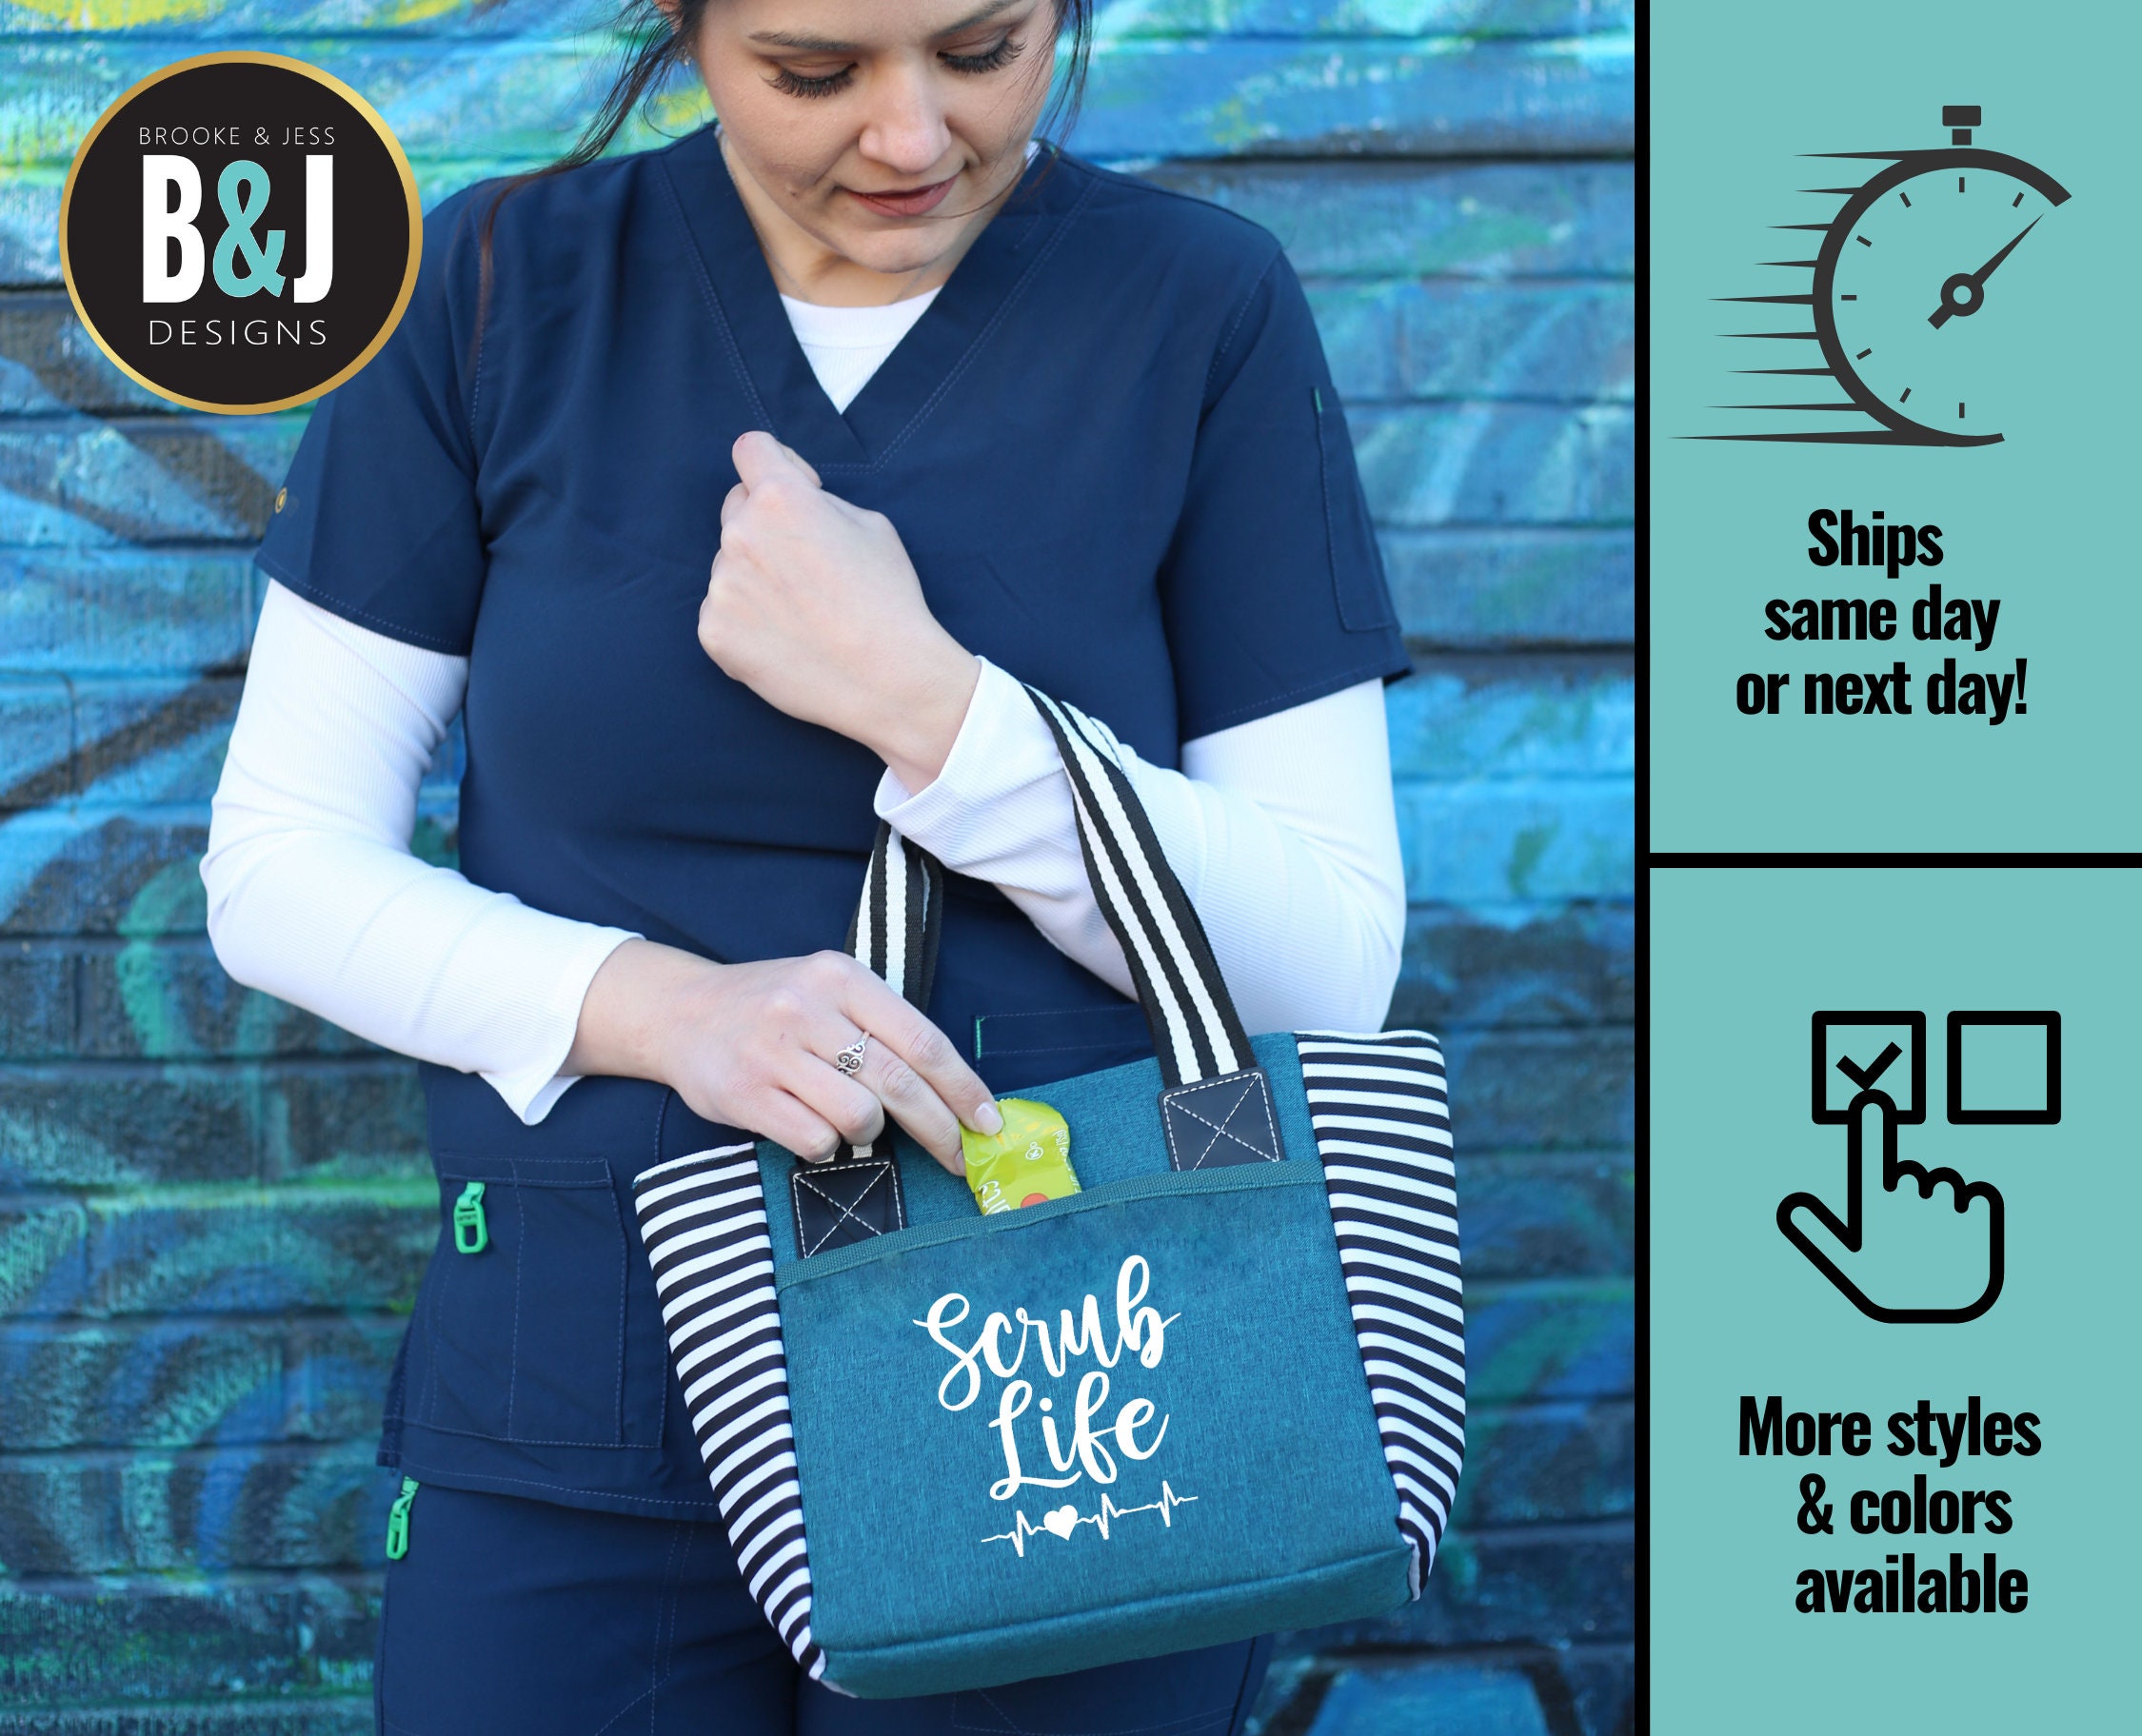 Custom Nursing Quotes Lunch Bag w/ Name or Text